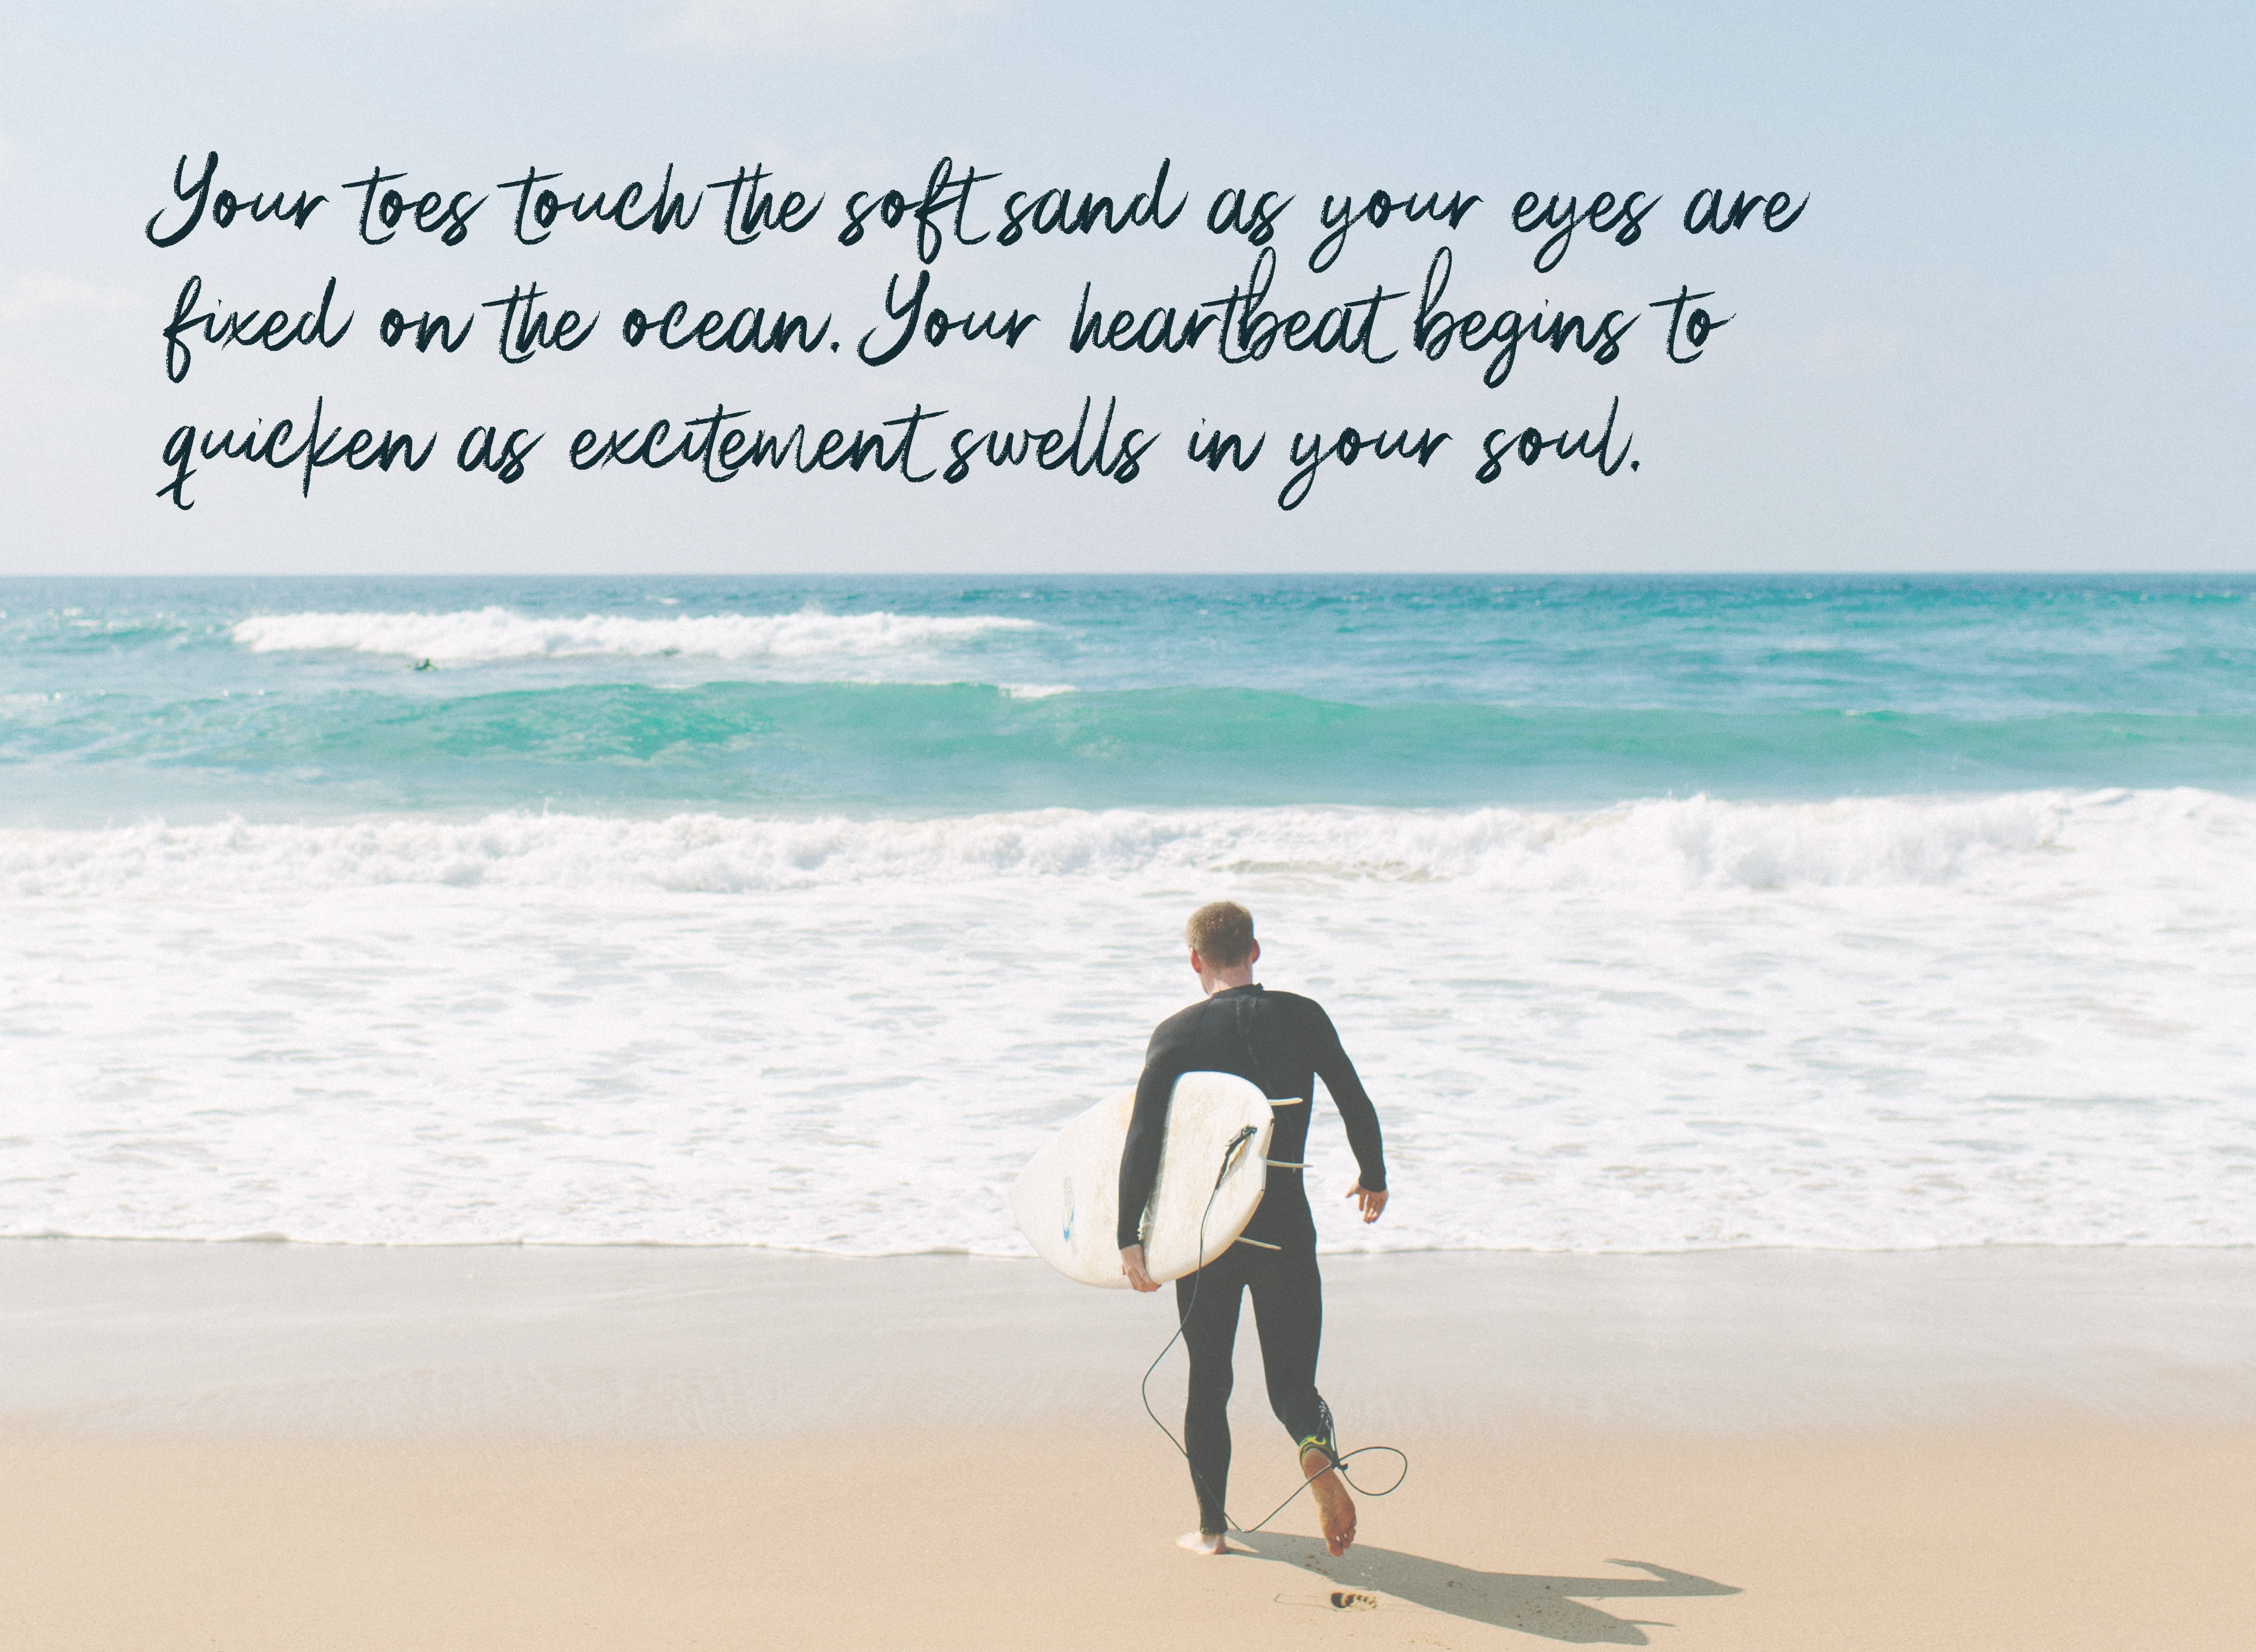 Bumps form on the horizon as you sit on your surfboard and observe. As the first bump gets closer you jolt down and paddle as fast as you can towards shore. The back of the surfboard begins to lift as your chosen wave grabs hold of you. 